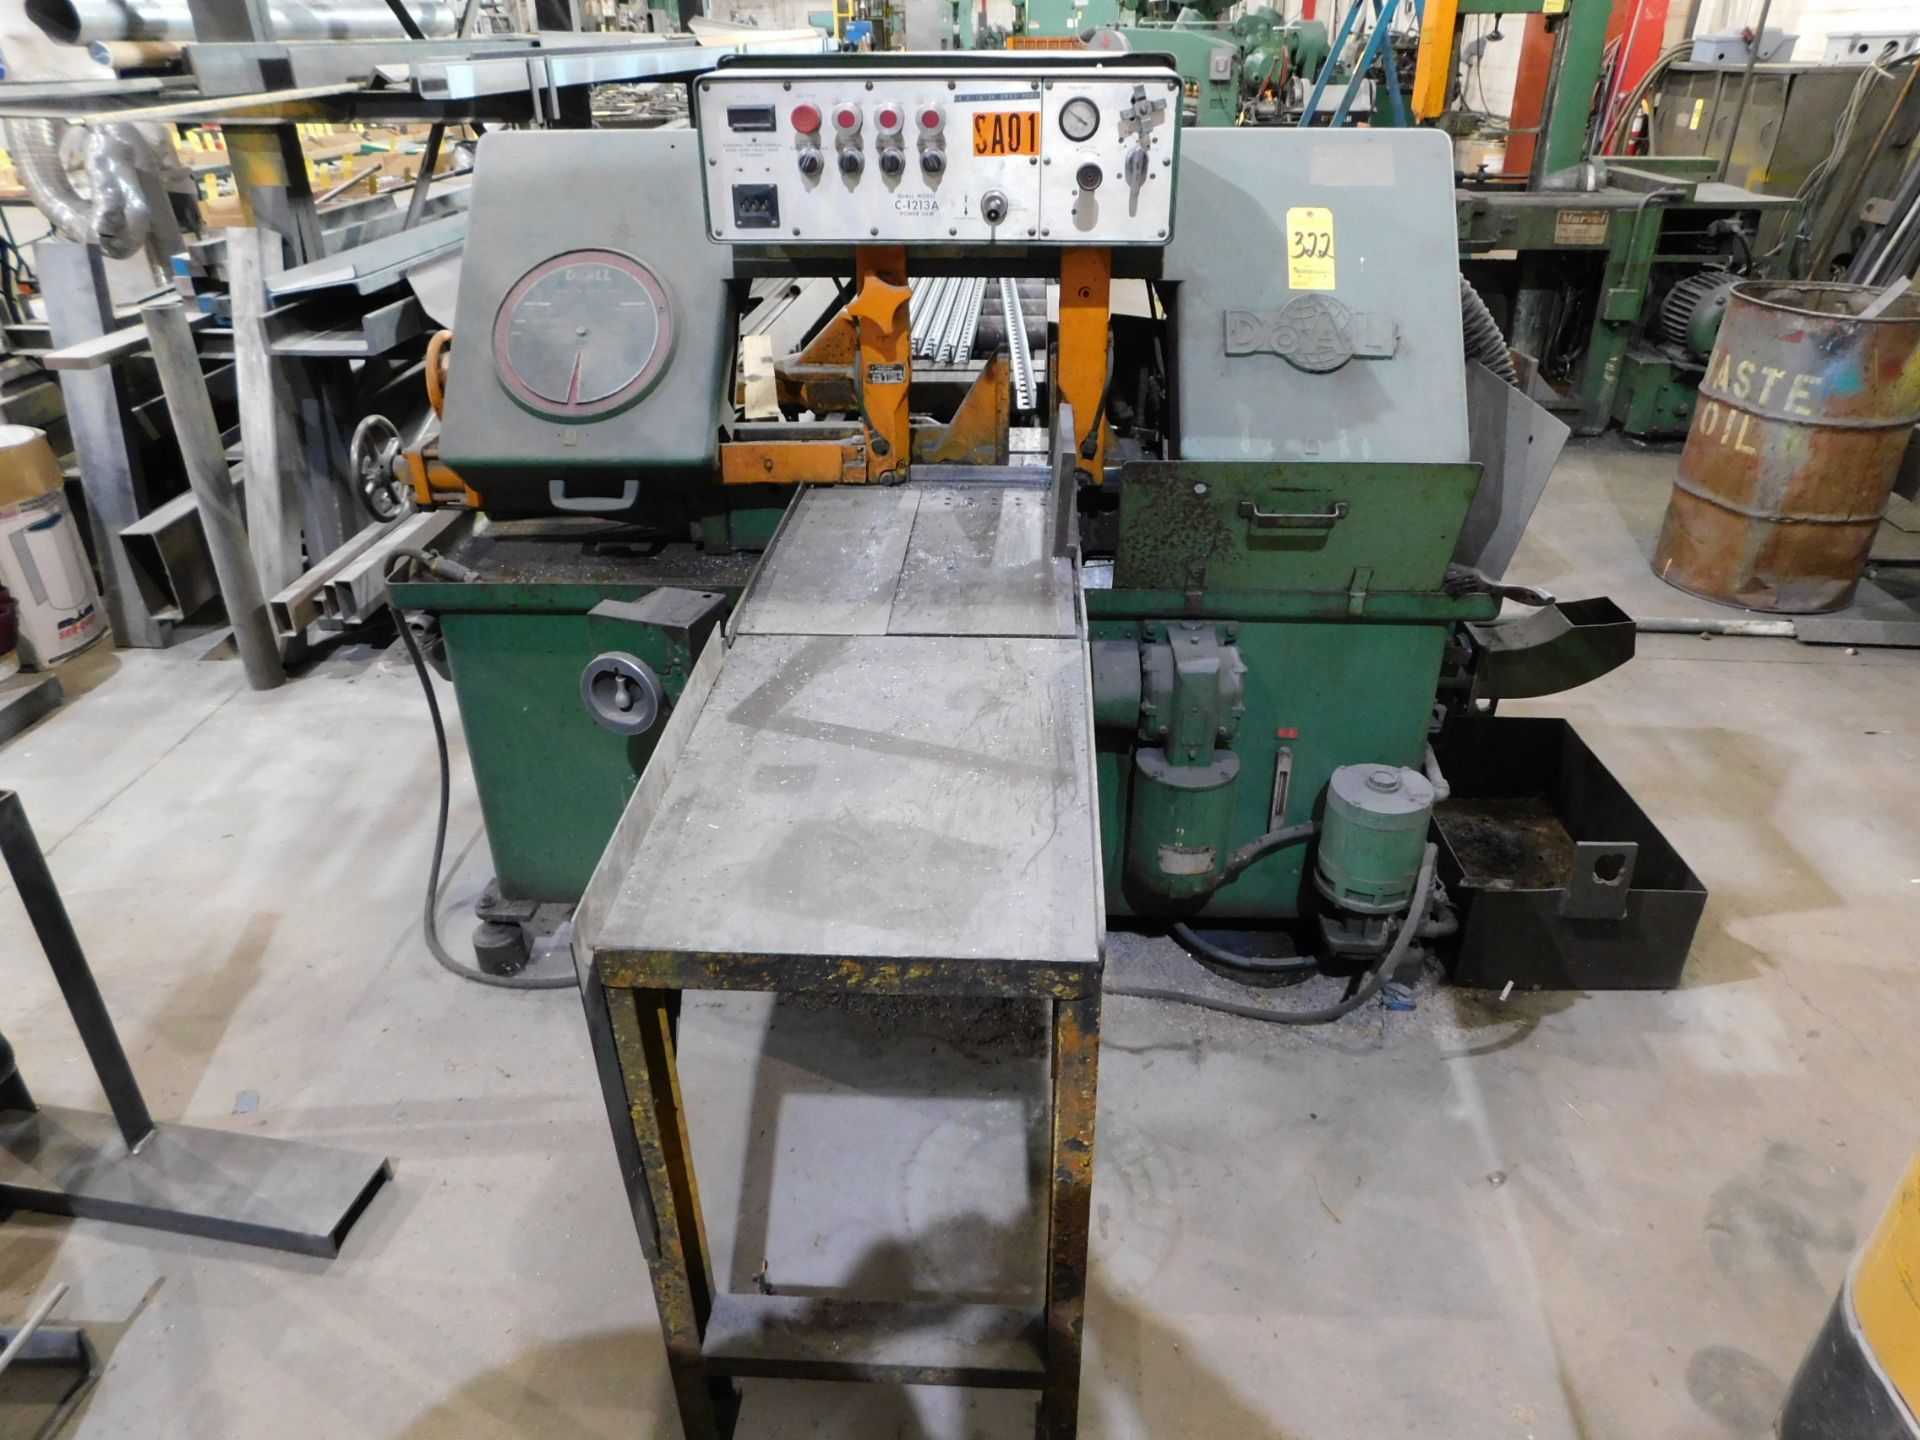 DoAll Model C-1213A Fully Automatic Horizontal Band Saw, s/n 412-89354, 1 1/4" Blade, 12" X 13"